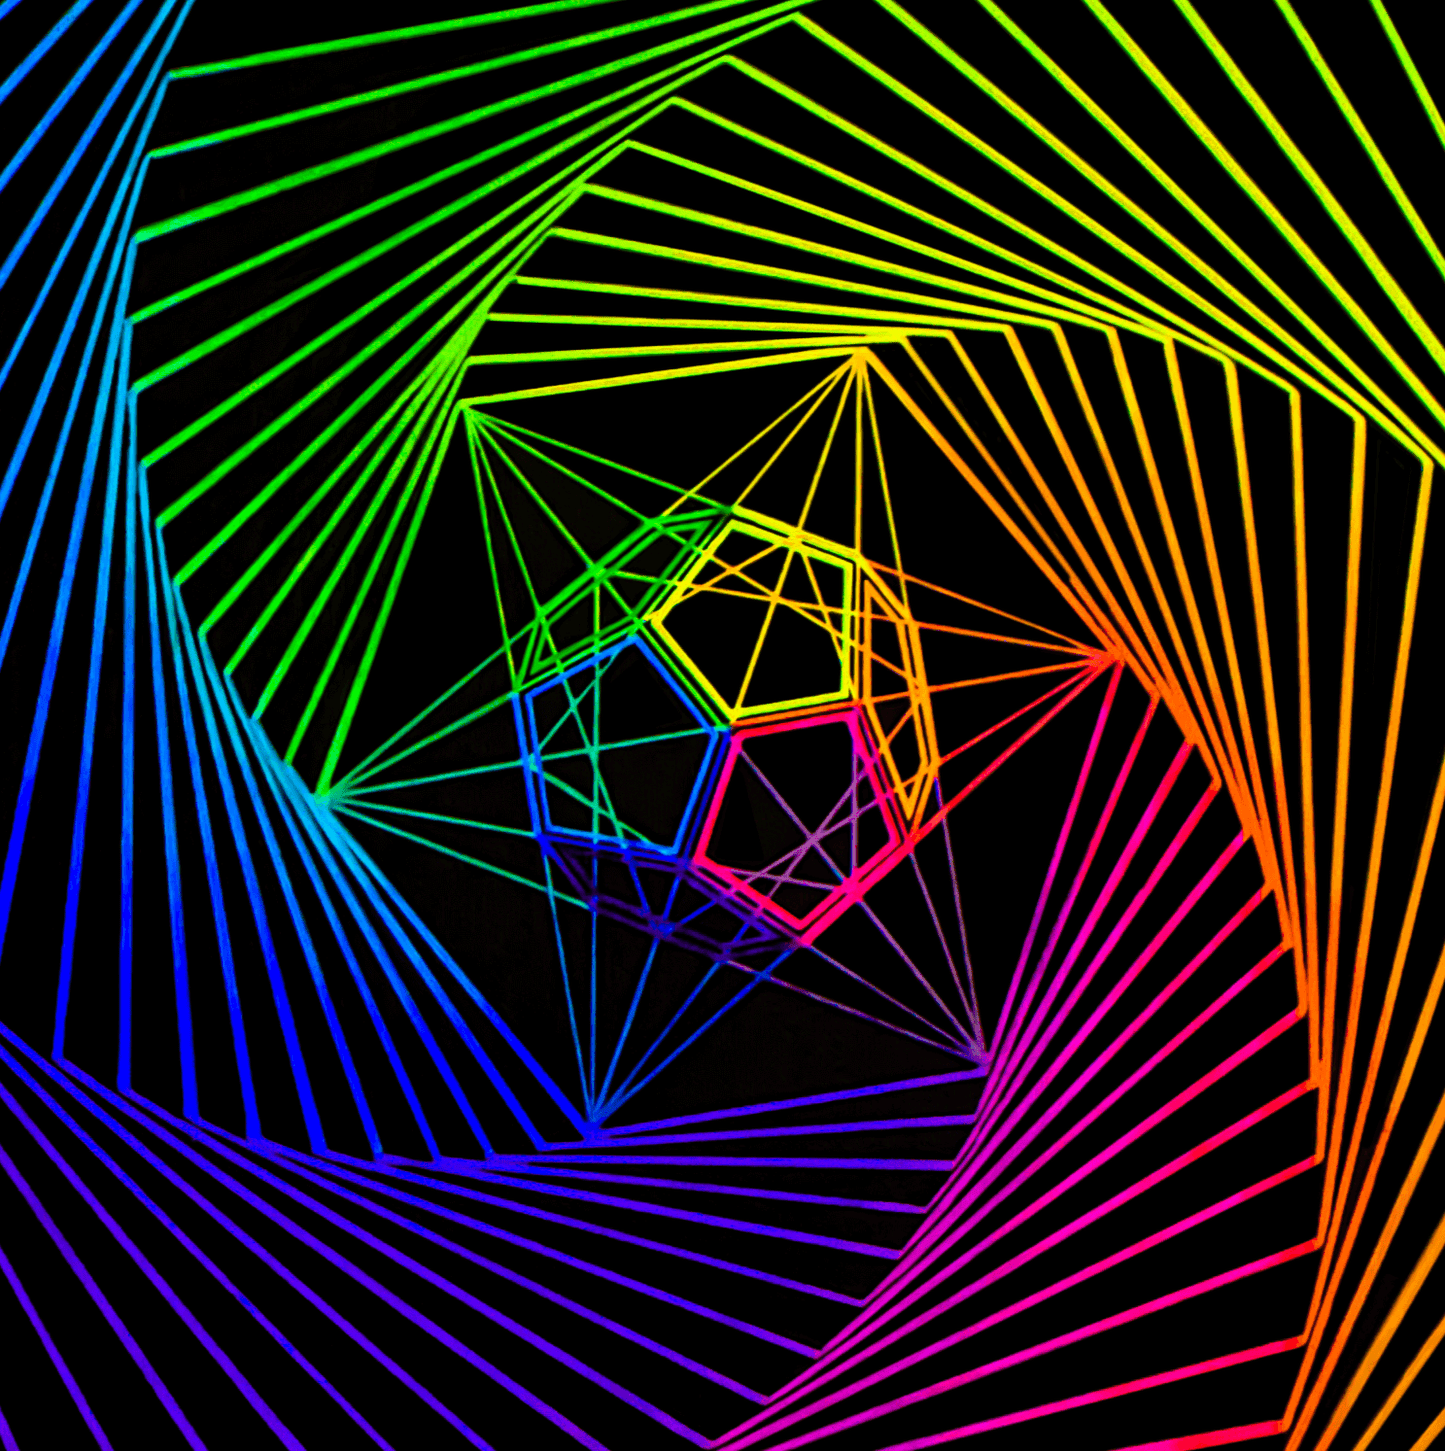 A close up of Sacred Geometry Art Poster Print painting showing The Dodecahedron which represents The Aether, inside a spiral of lines all bright neon color